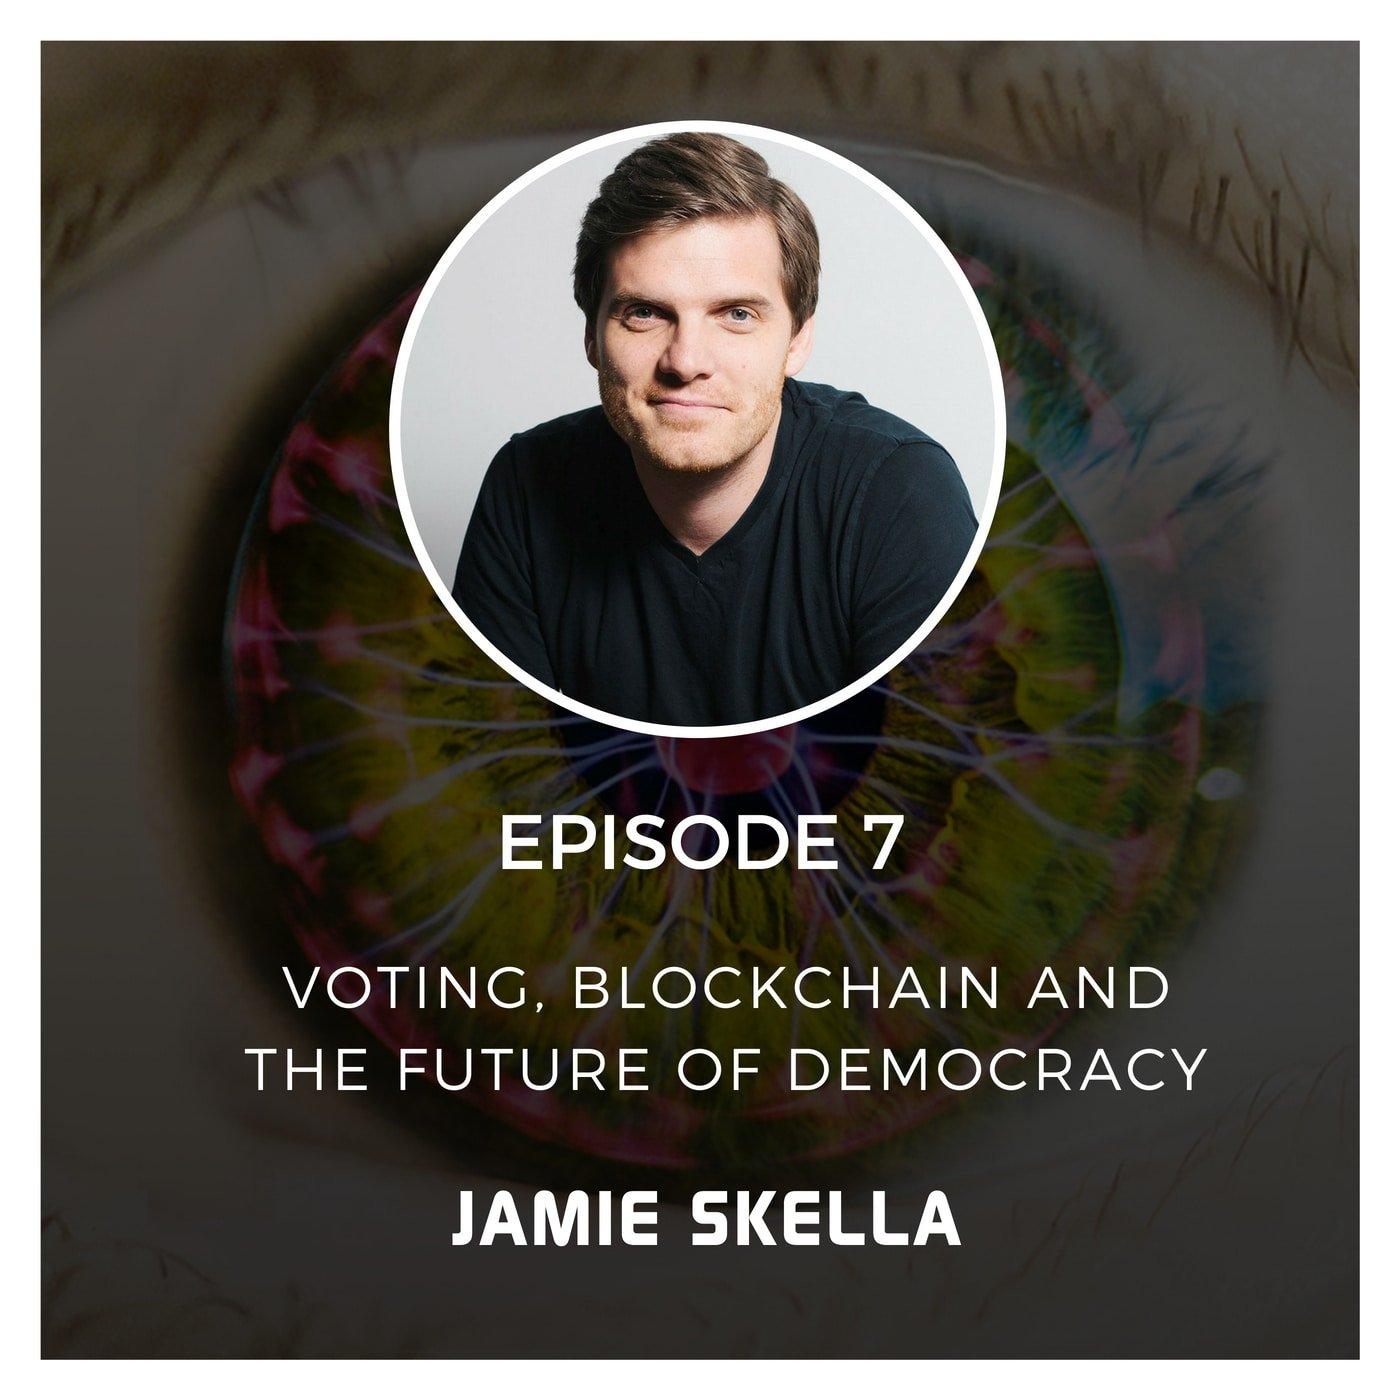 Voting, Blockchain and The Future of Democracy with Jamie Skella - Episode 7